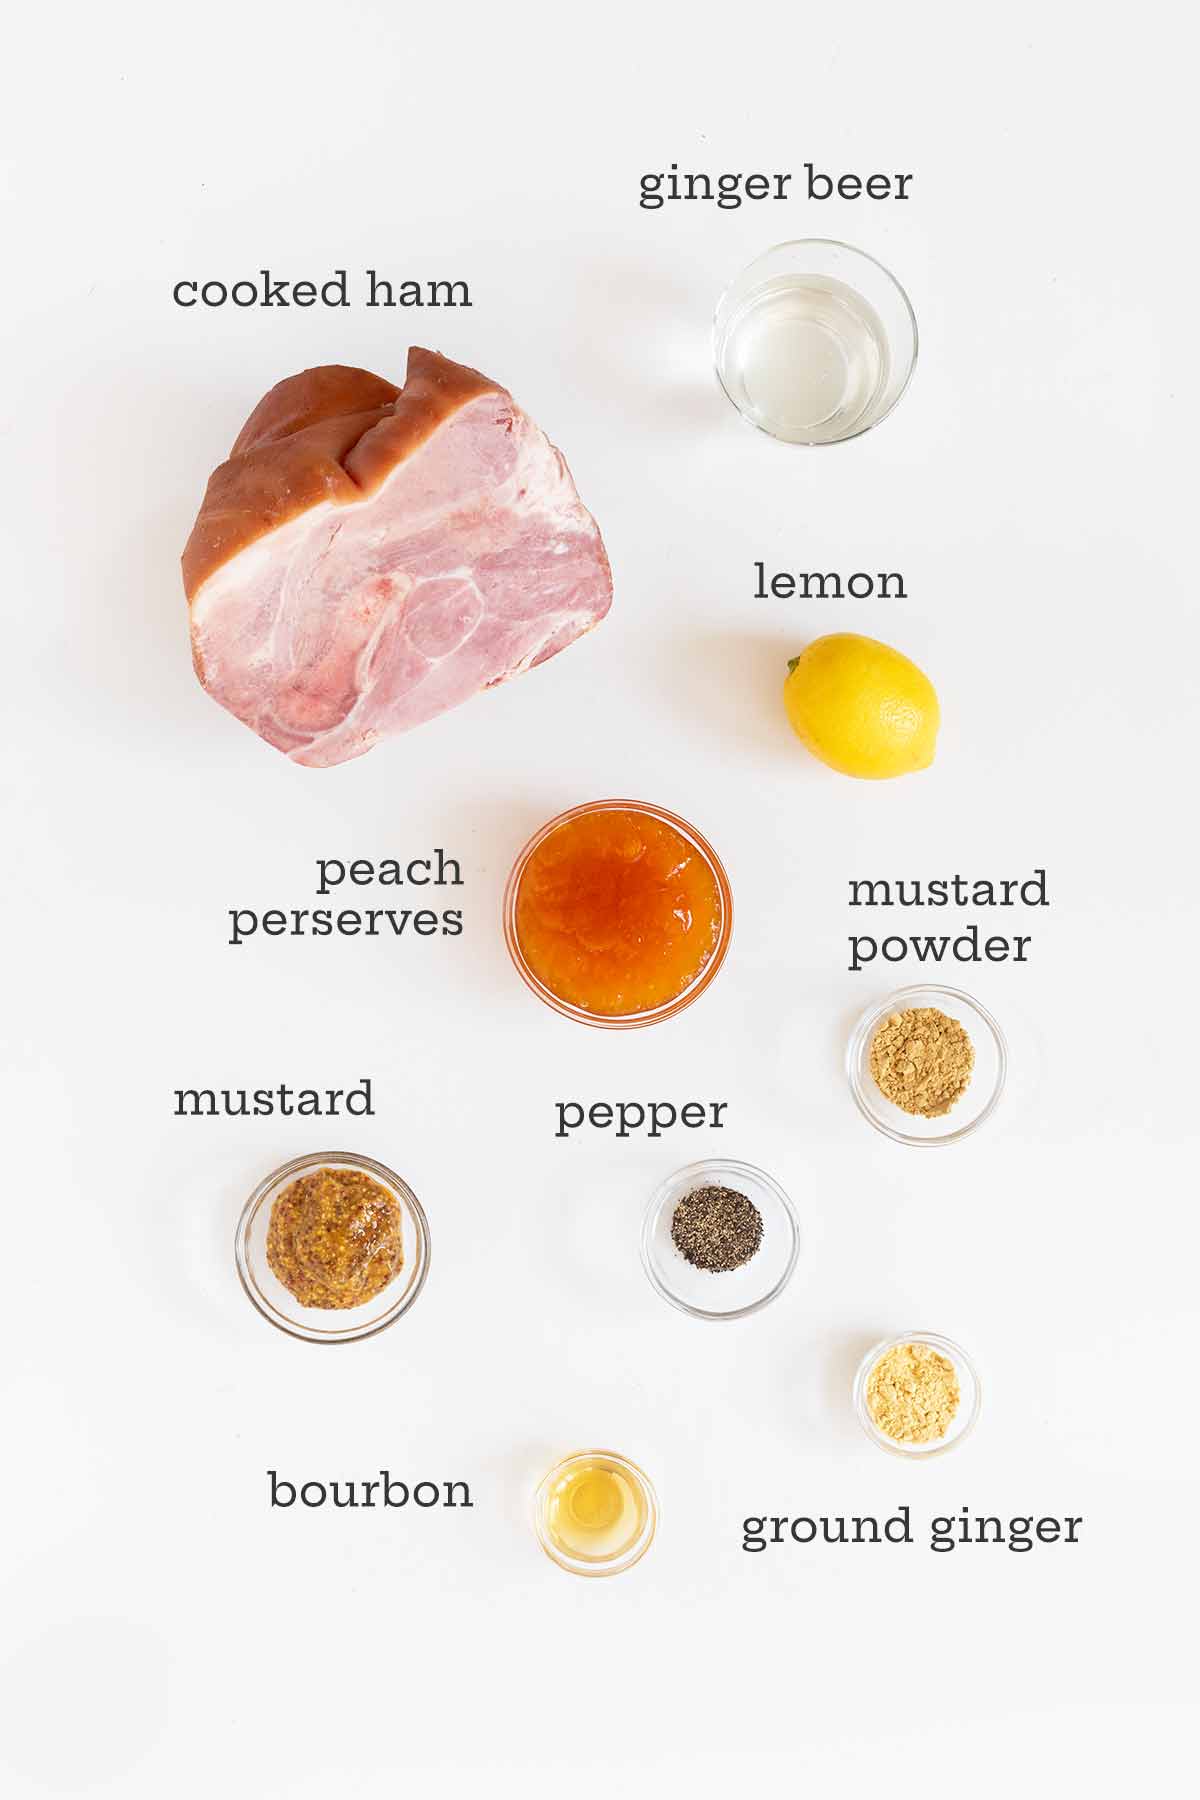 Ingredients for Instant Pot ham in separate bowls -- cooked ham, ginger beer, lemon, spices, and peach preserves.